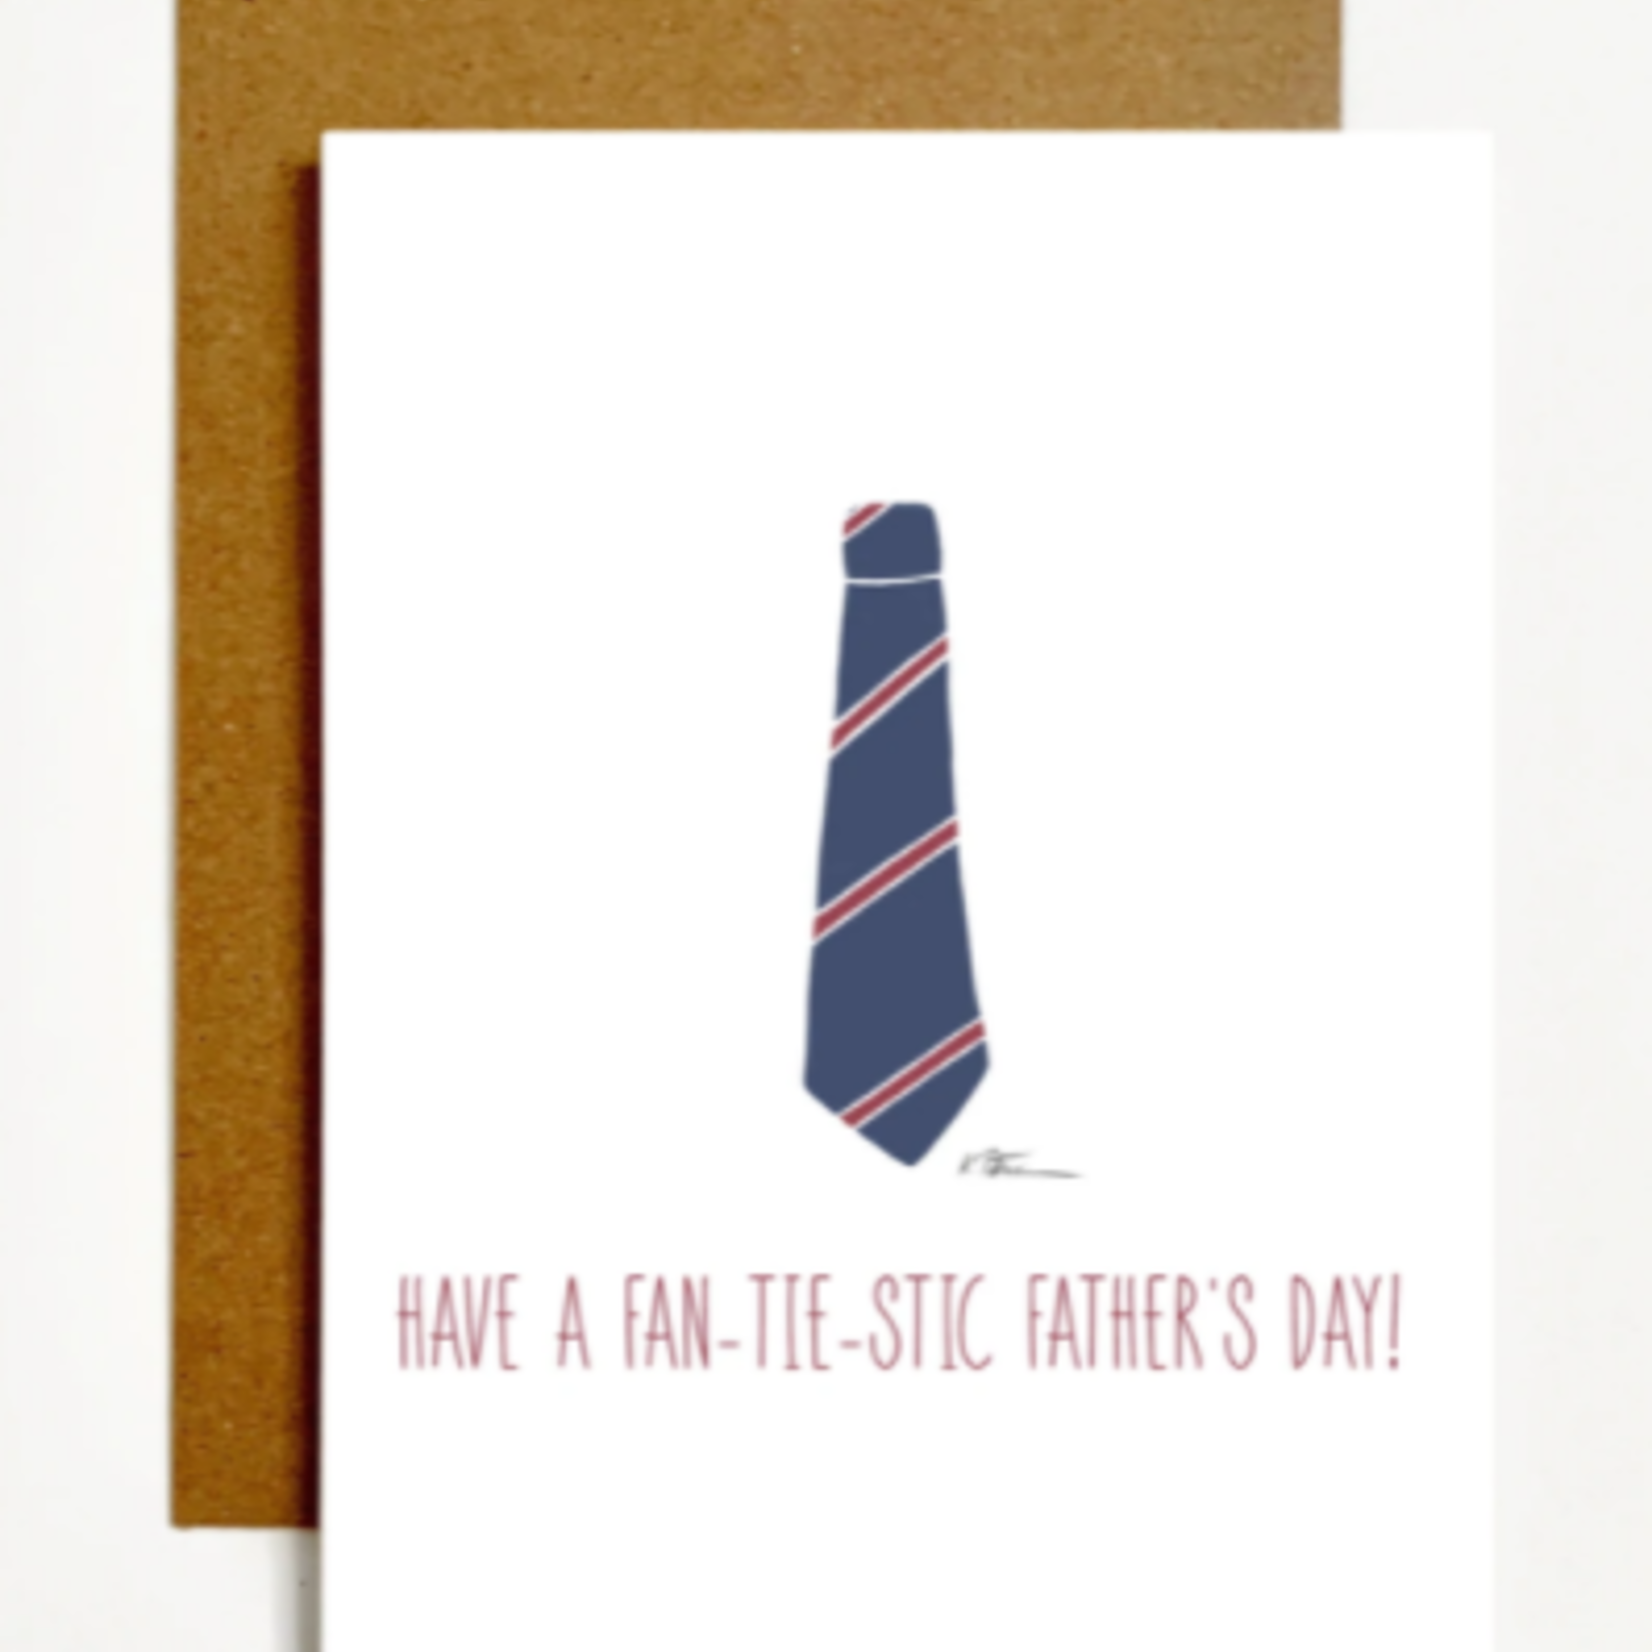 Have A Fan-Tie-Stic Fathers Day Greeting Card